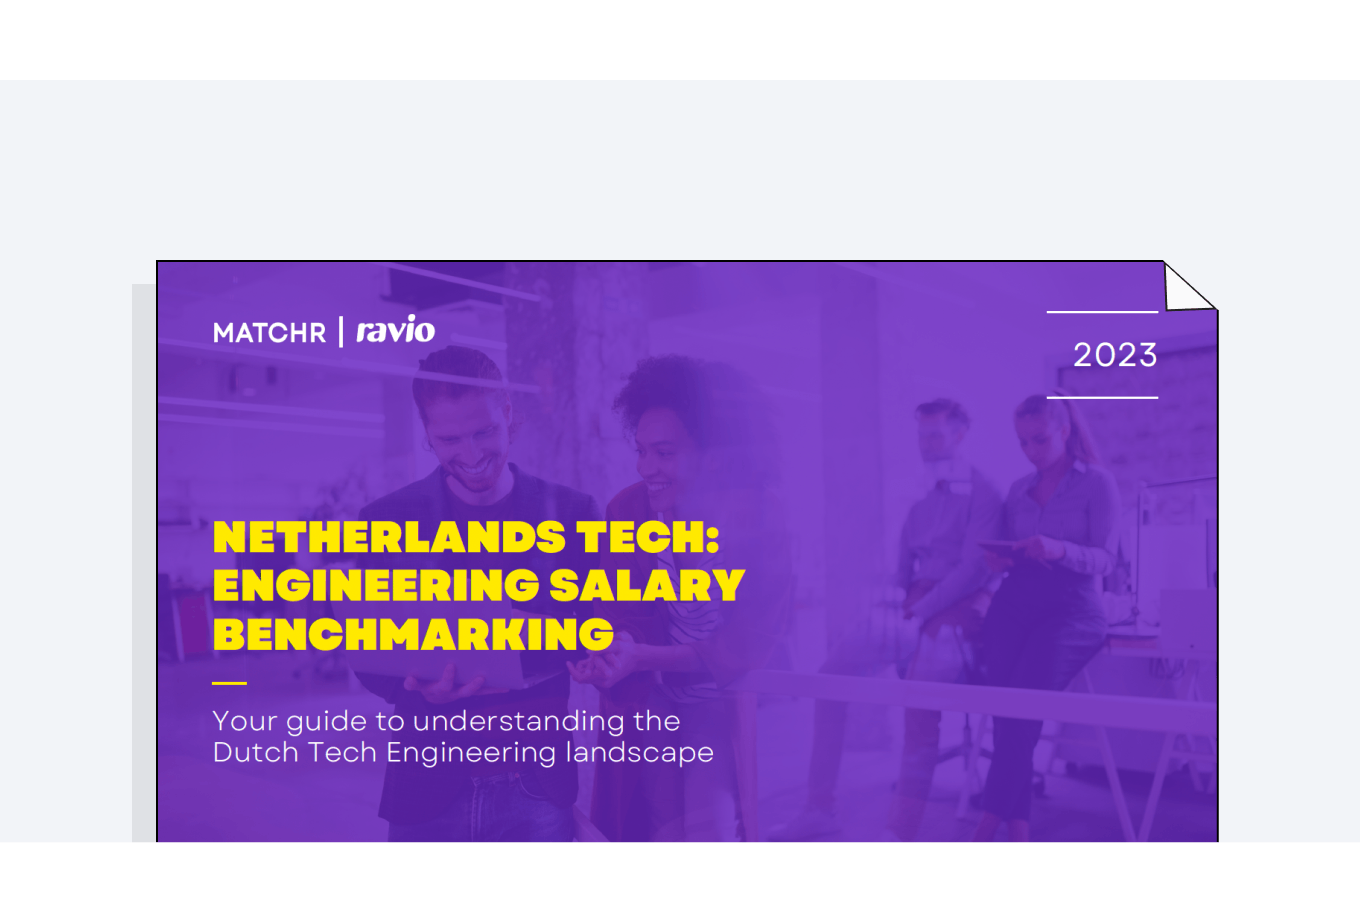 Matchr and Ravio: Netherlands tech engineering salary benchmarking. Your guide to understanding the Dutch Tech Engineering landscape